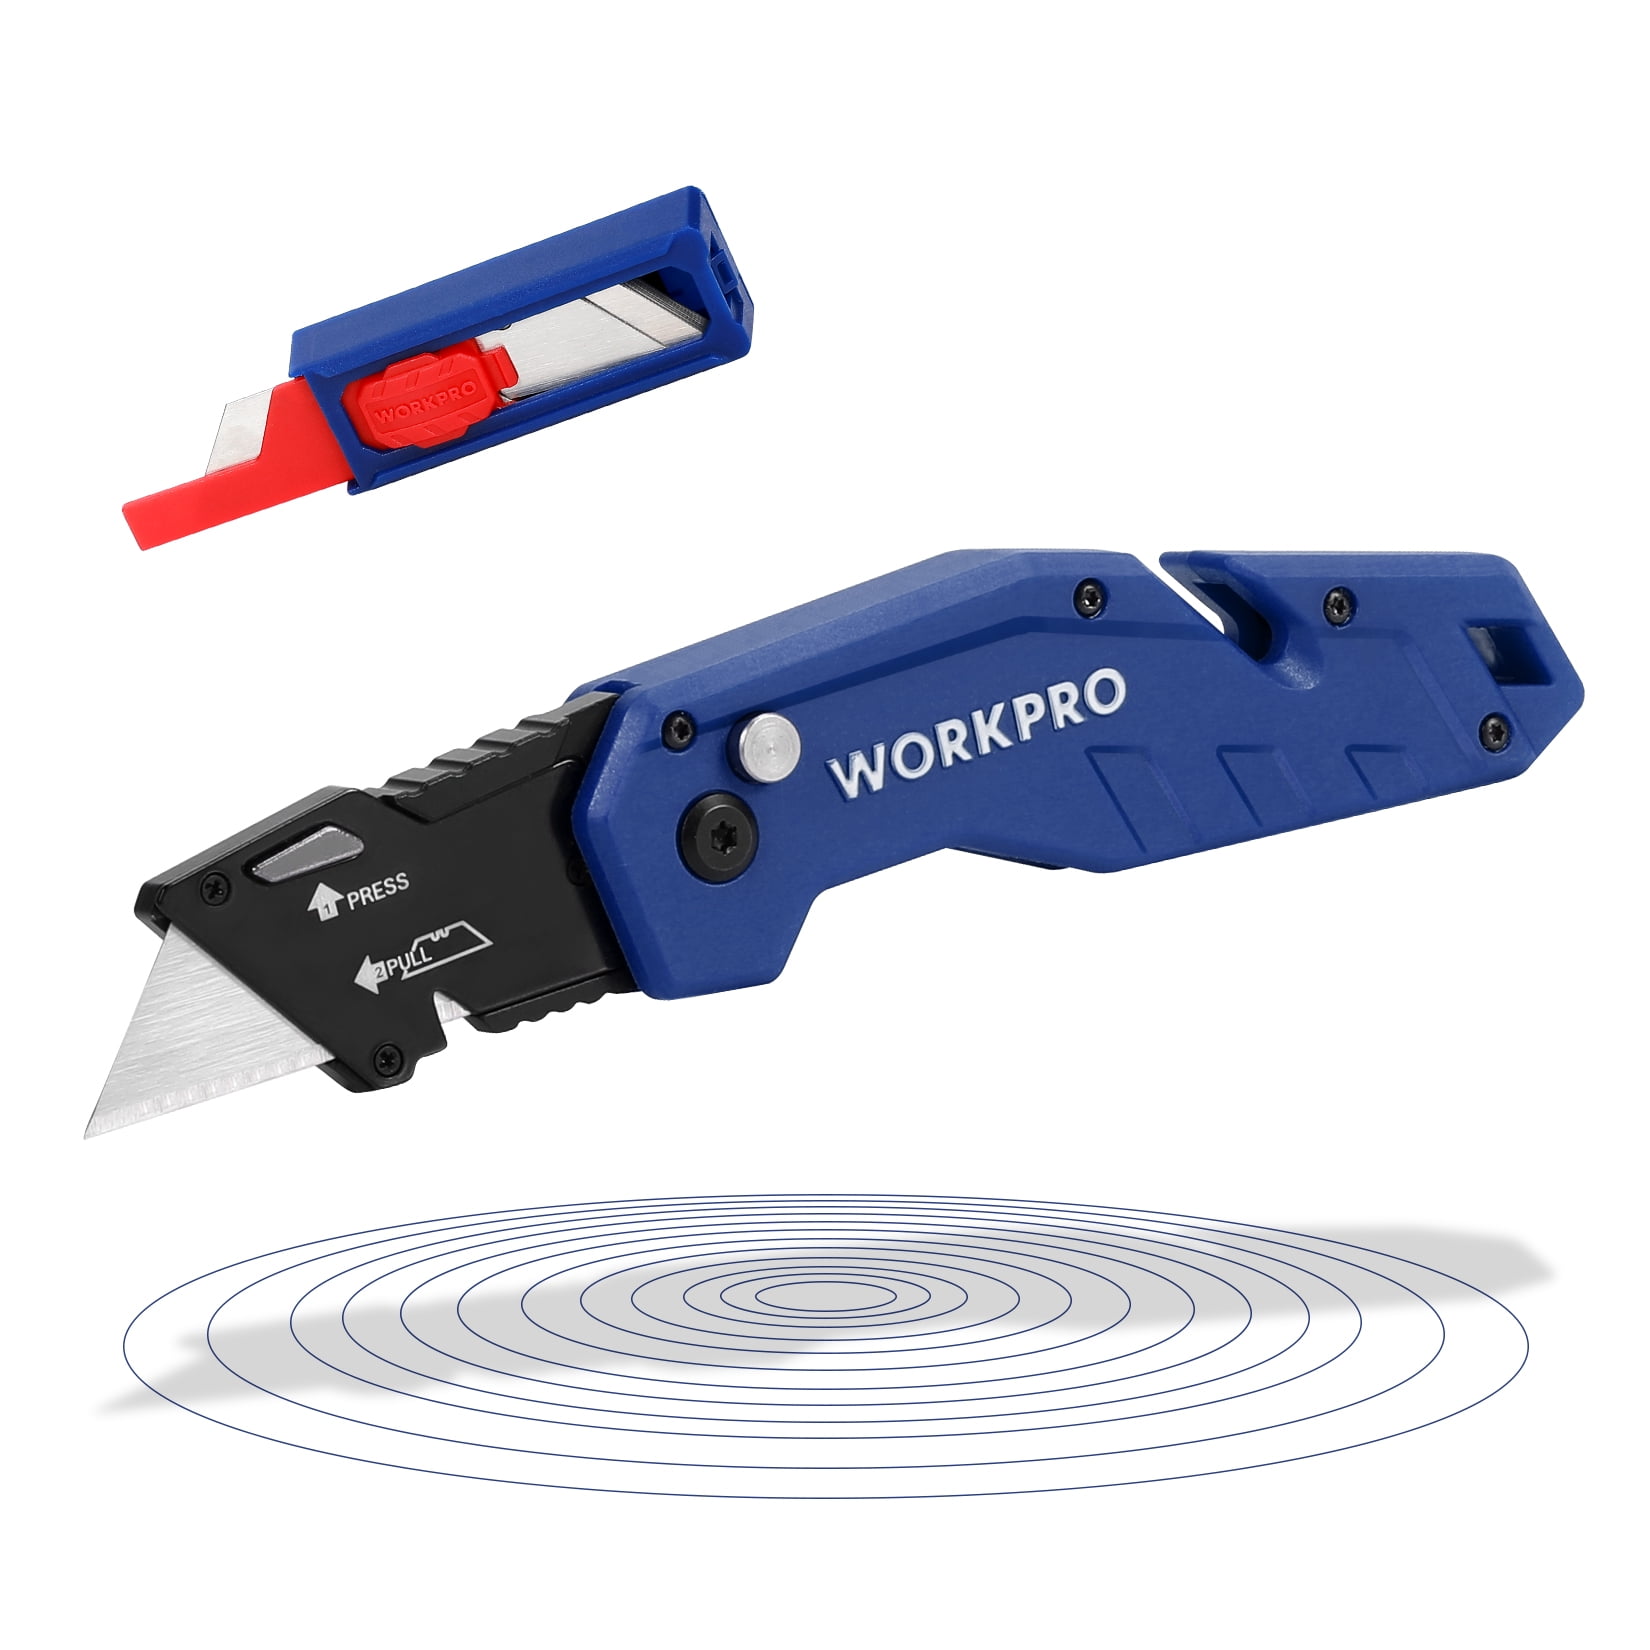 WorkPro 8 Mini Bolt Cutter, Three-color Bi-Material Ergonomic Handle with Security Lock & More Efficient Leverage, Chrome Molybdenum Steel Blade